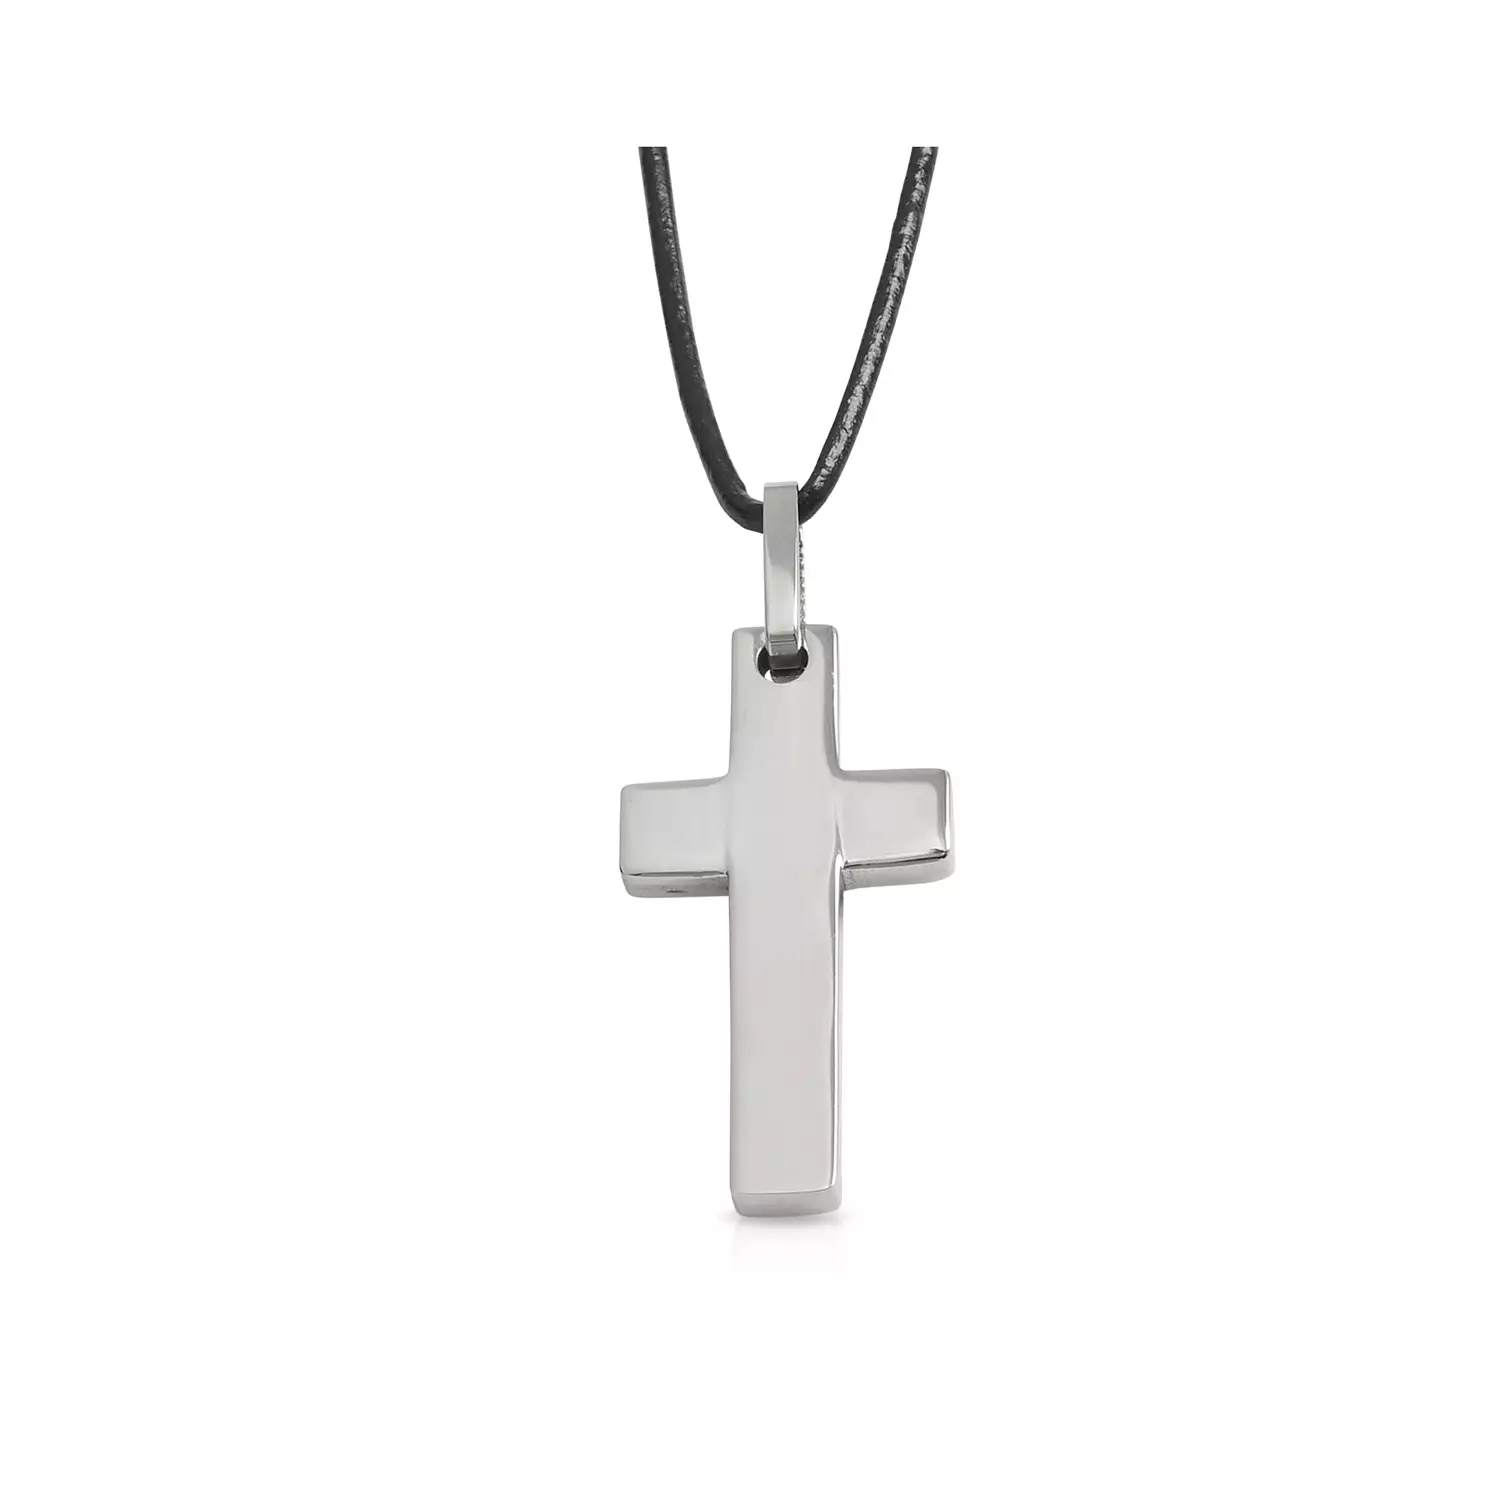 High Polished Cross Pendant on Leather Cord